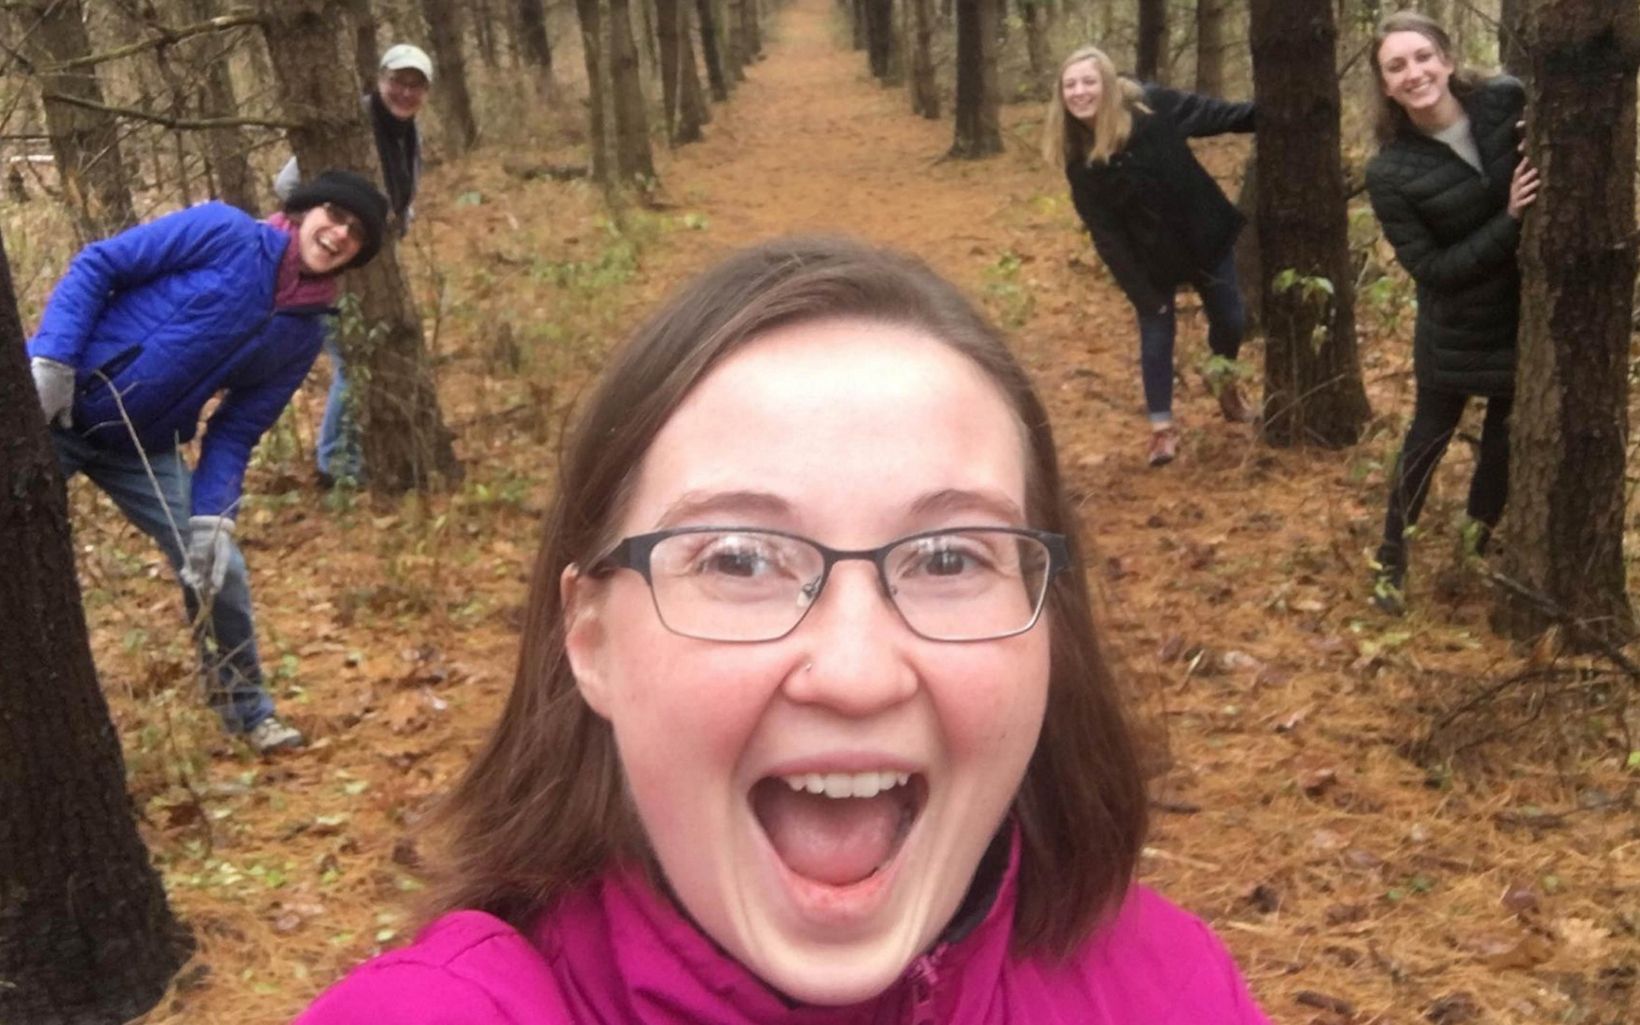 Group of women hiding behind trees on a nature trail. 